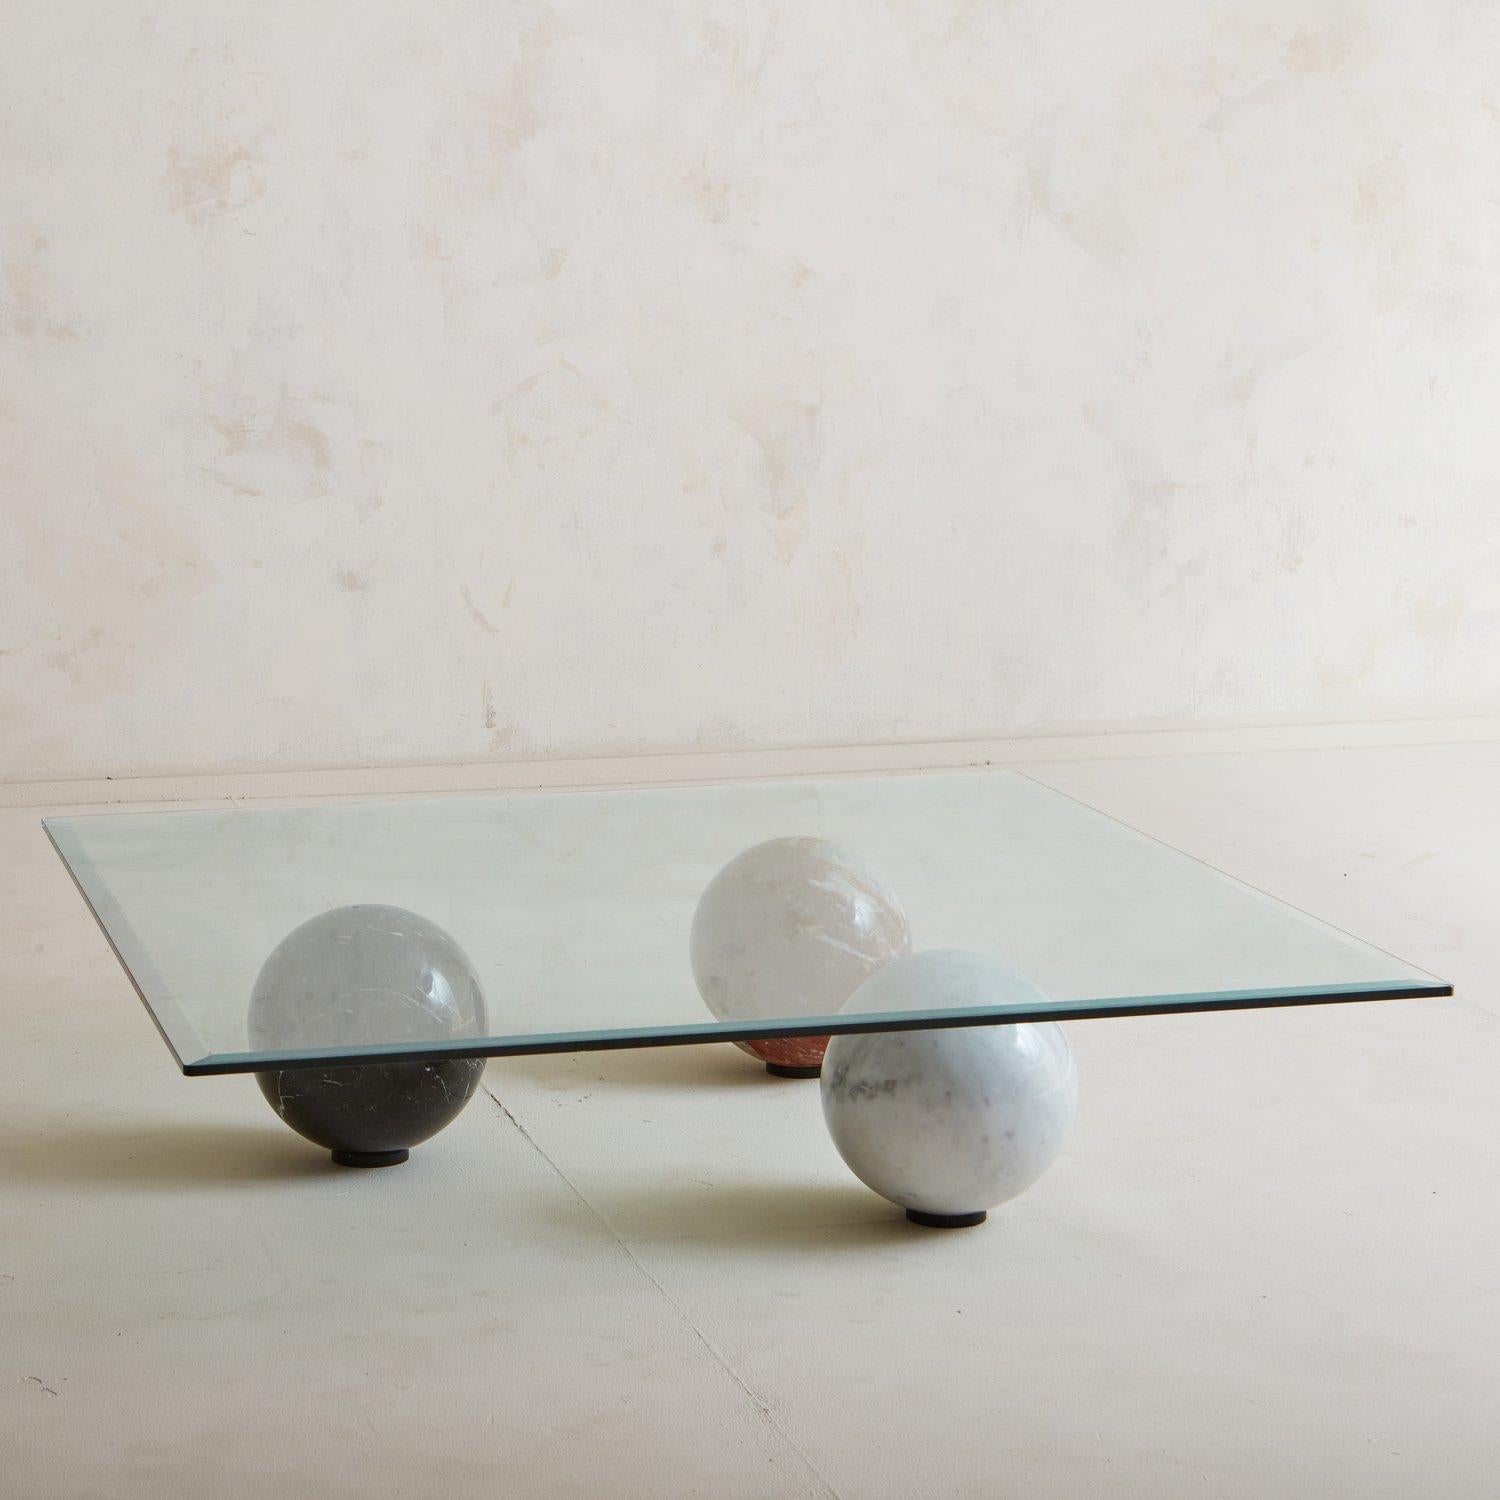 A gorgeous coffee table attributed to Italian manufacturer Cattelan Italia in the 1990s. This table features a marble base formed with three spheres in white, black and red with beautiful veining. It has a square glass tabletop with a beveled edge.